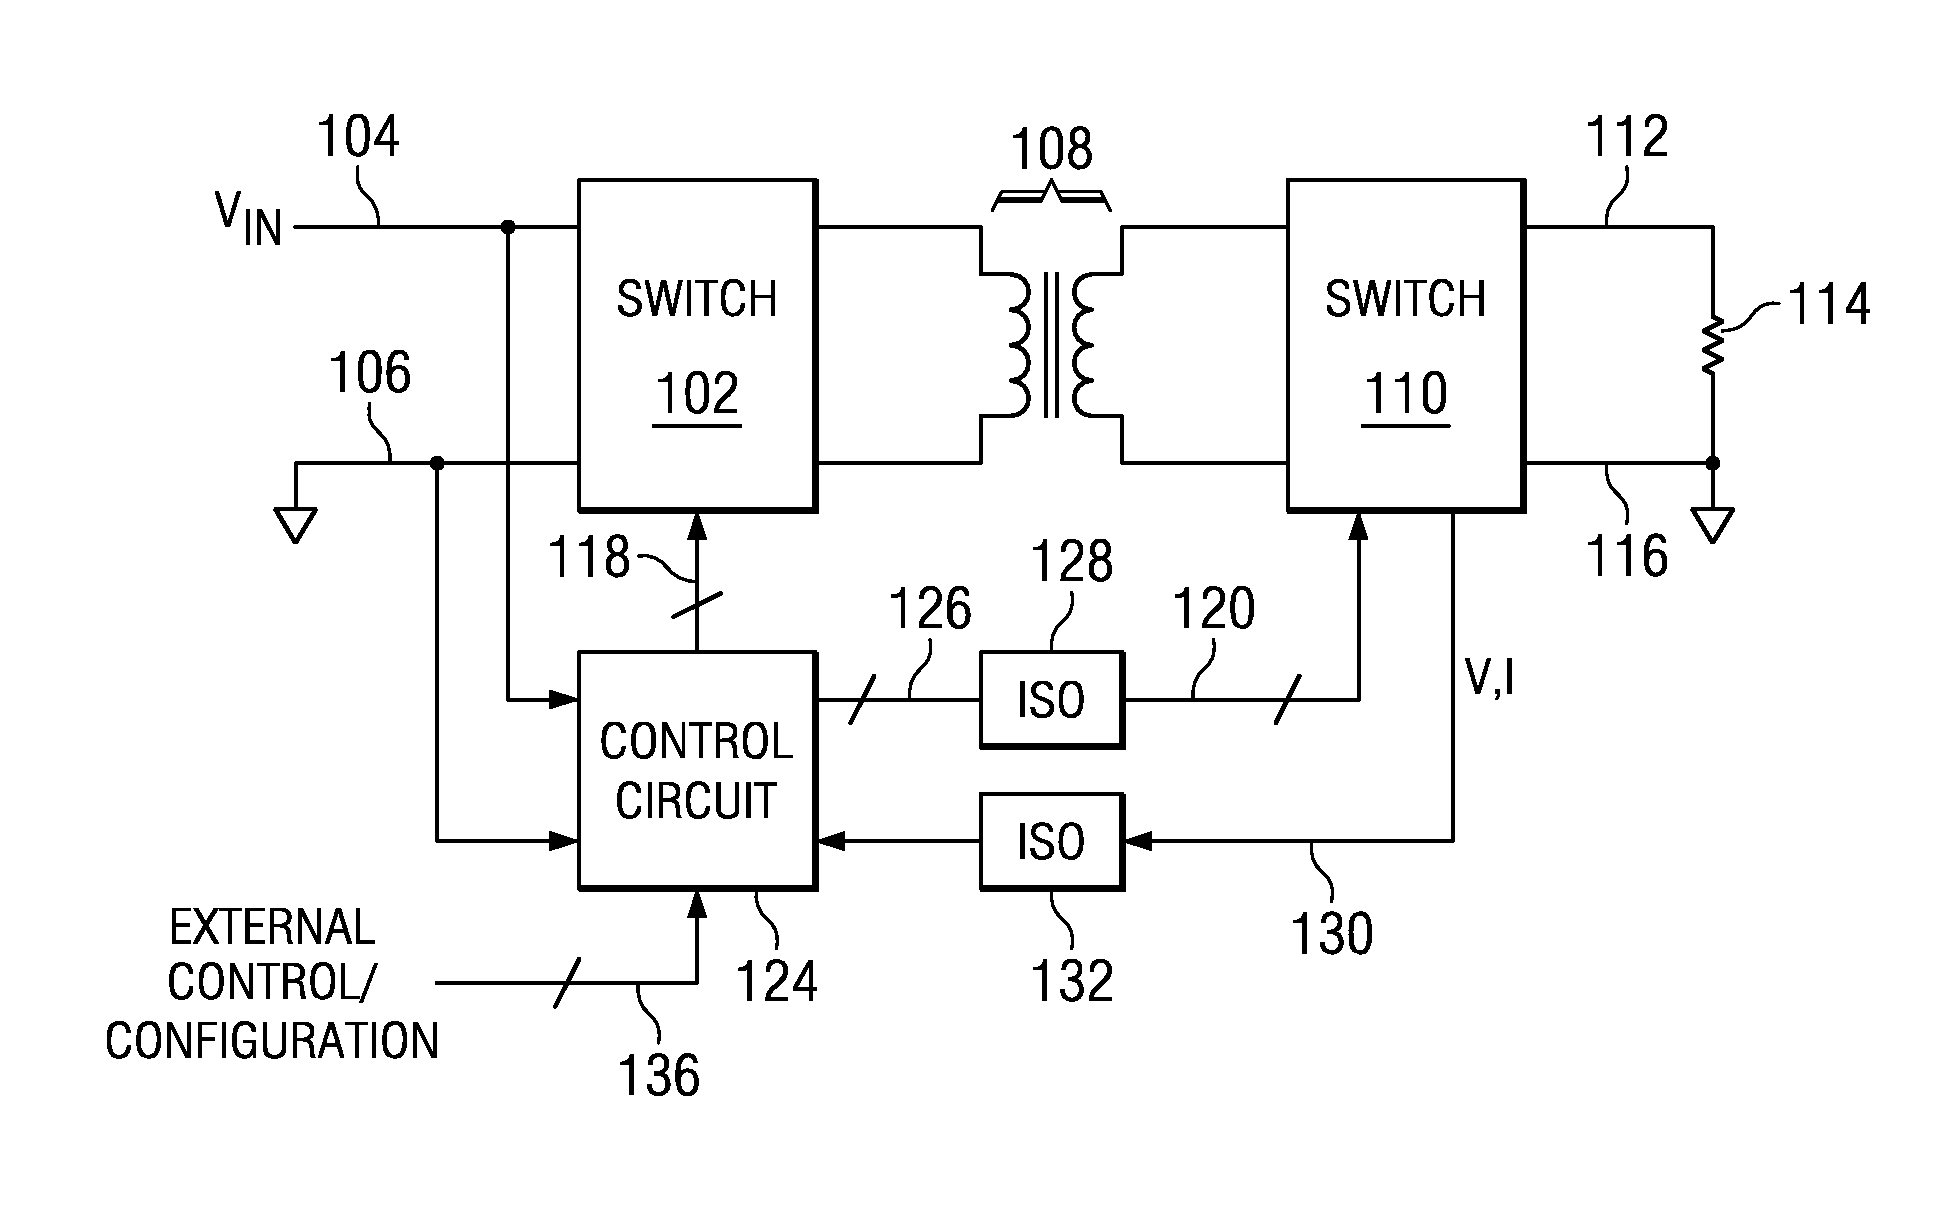 Distributed power supply system with separate SYNC control for controlling remote digital DC/DC converters